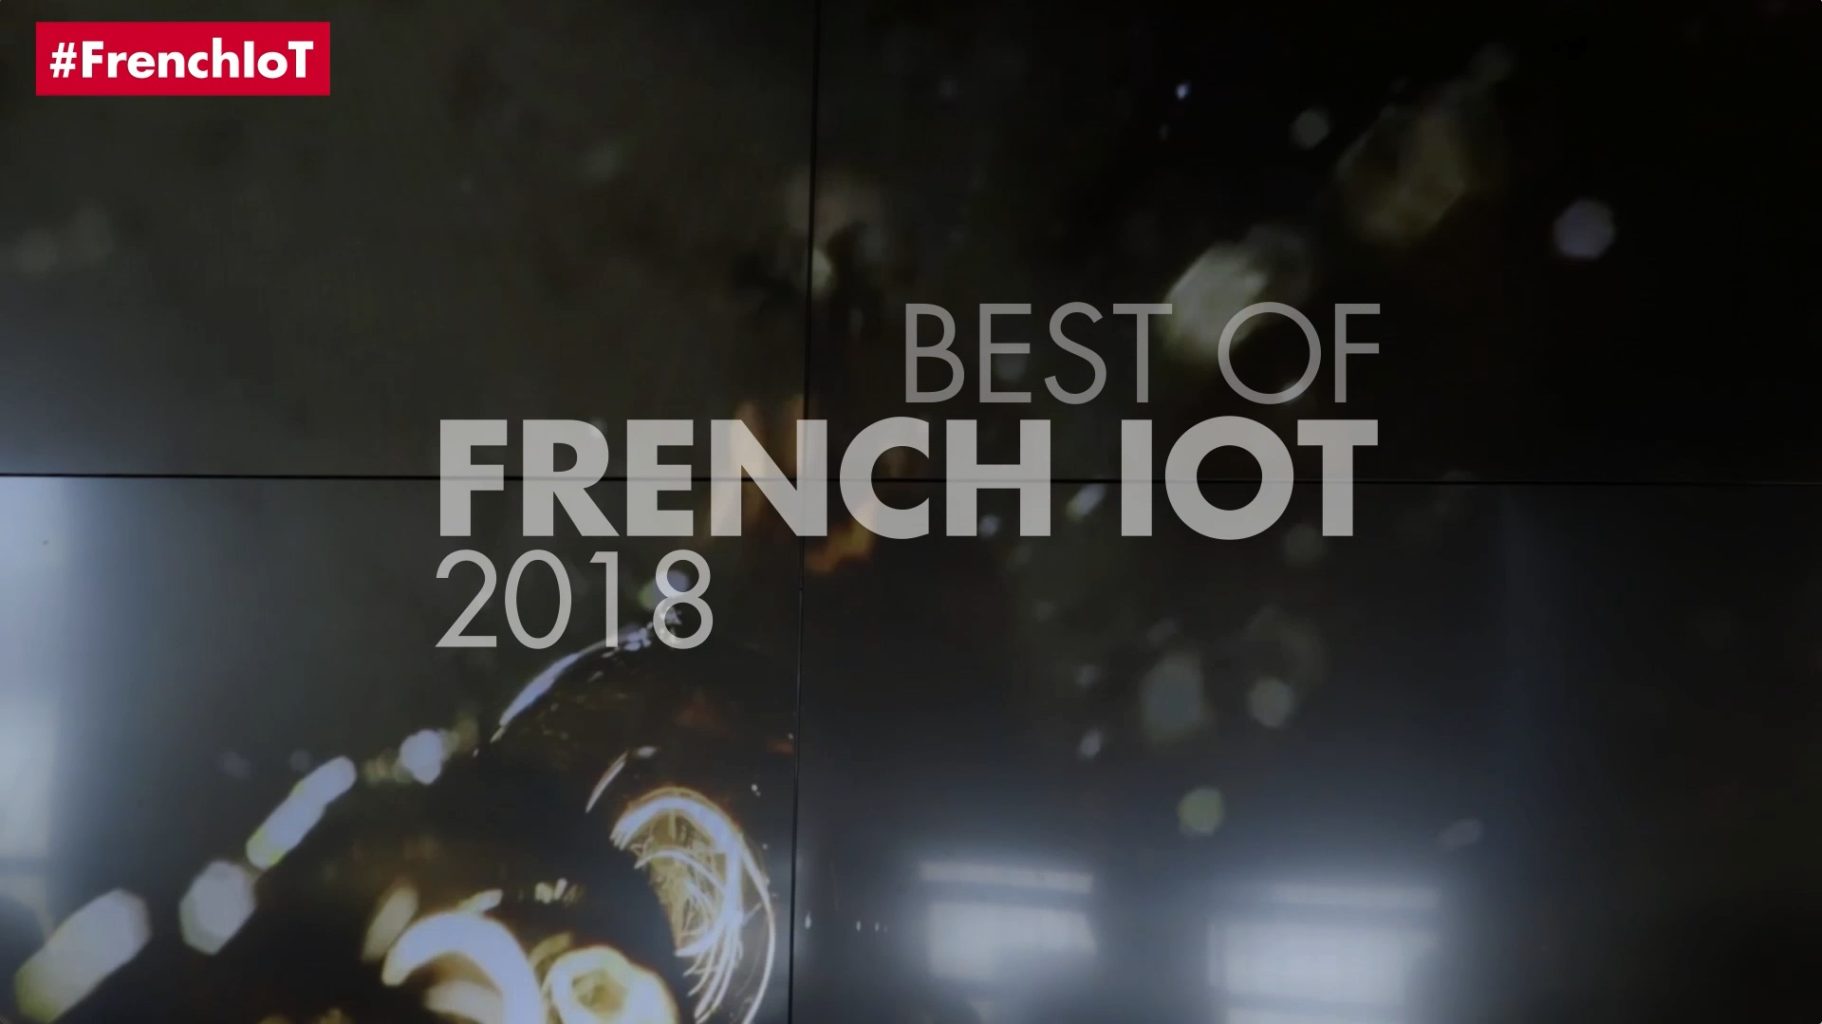 French IoT saison 4 : le Best Of